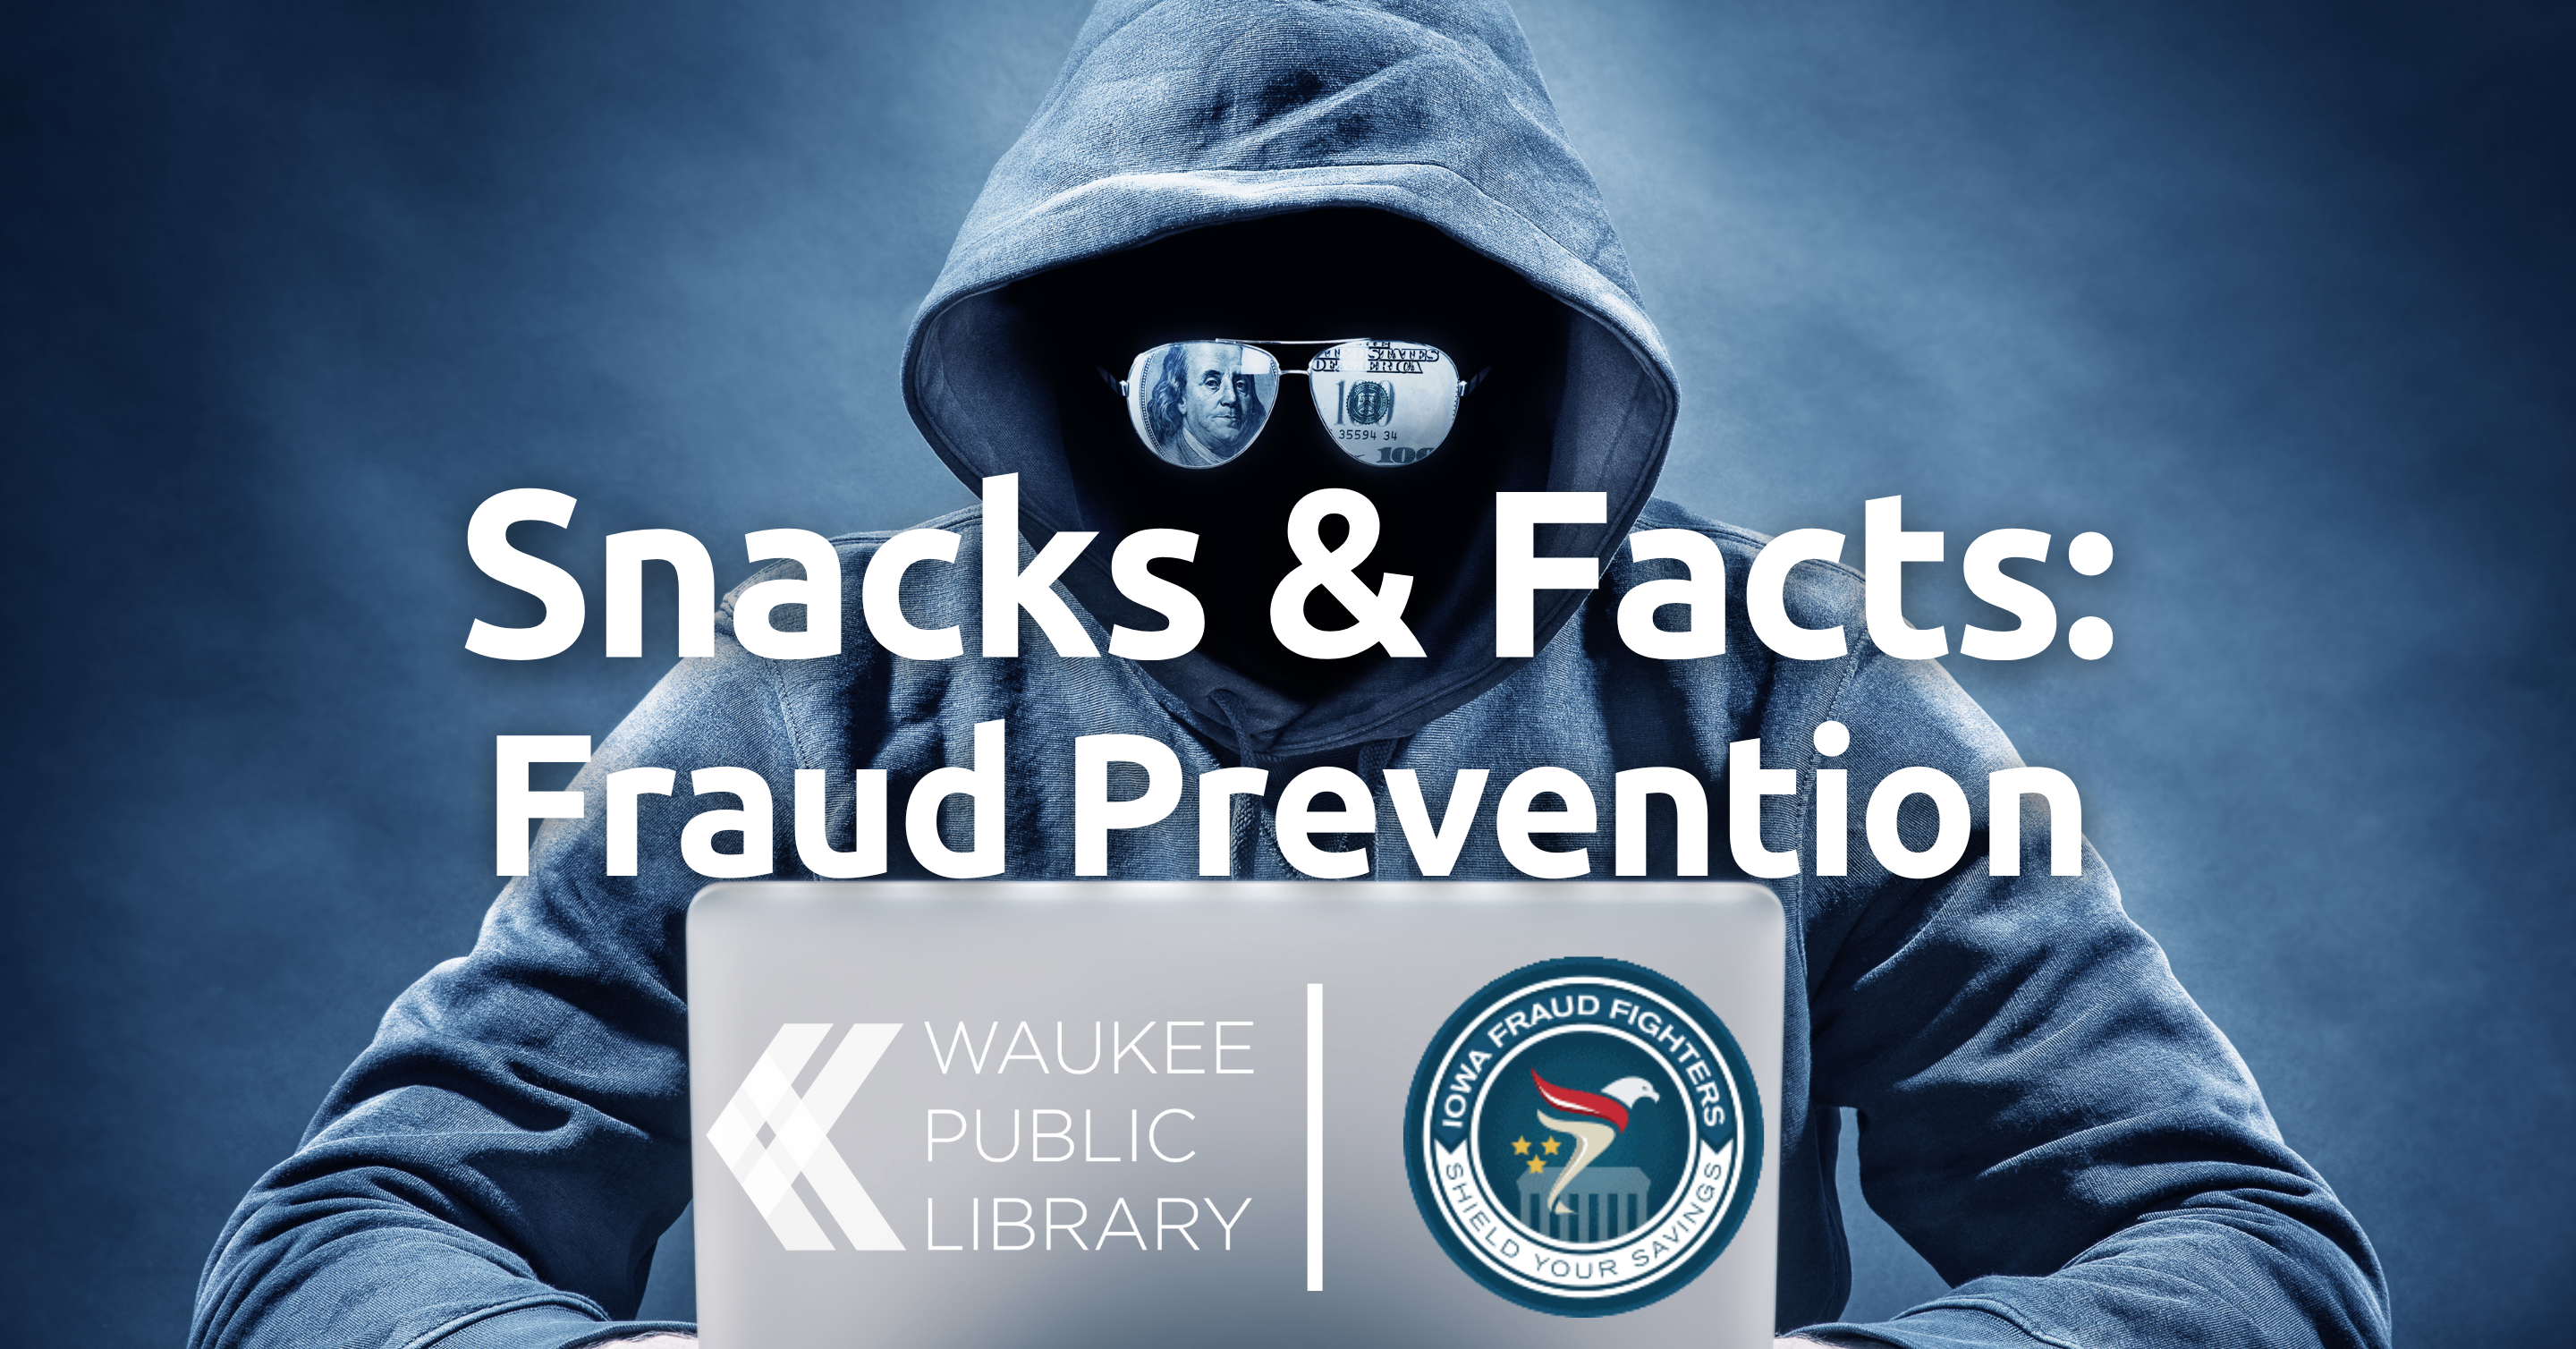 Snacks & Facts: Fraud Prevention